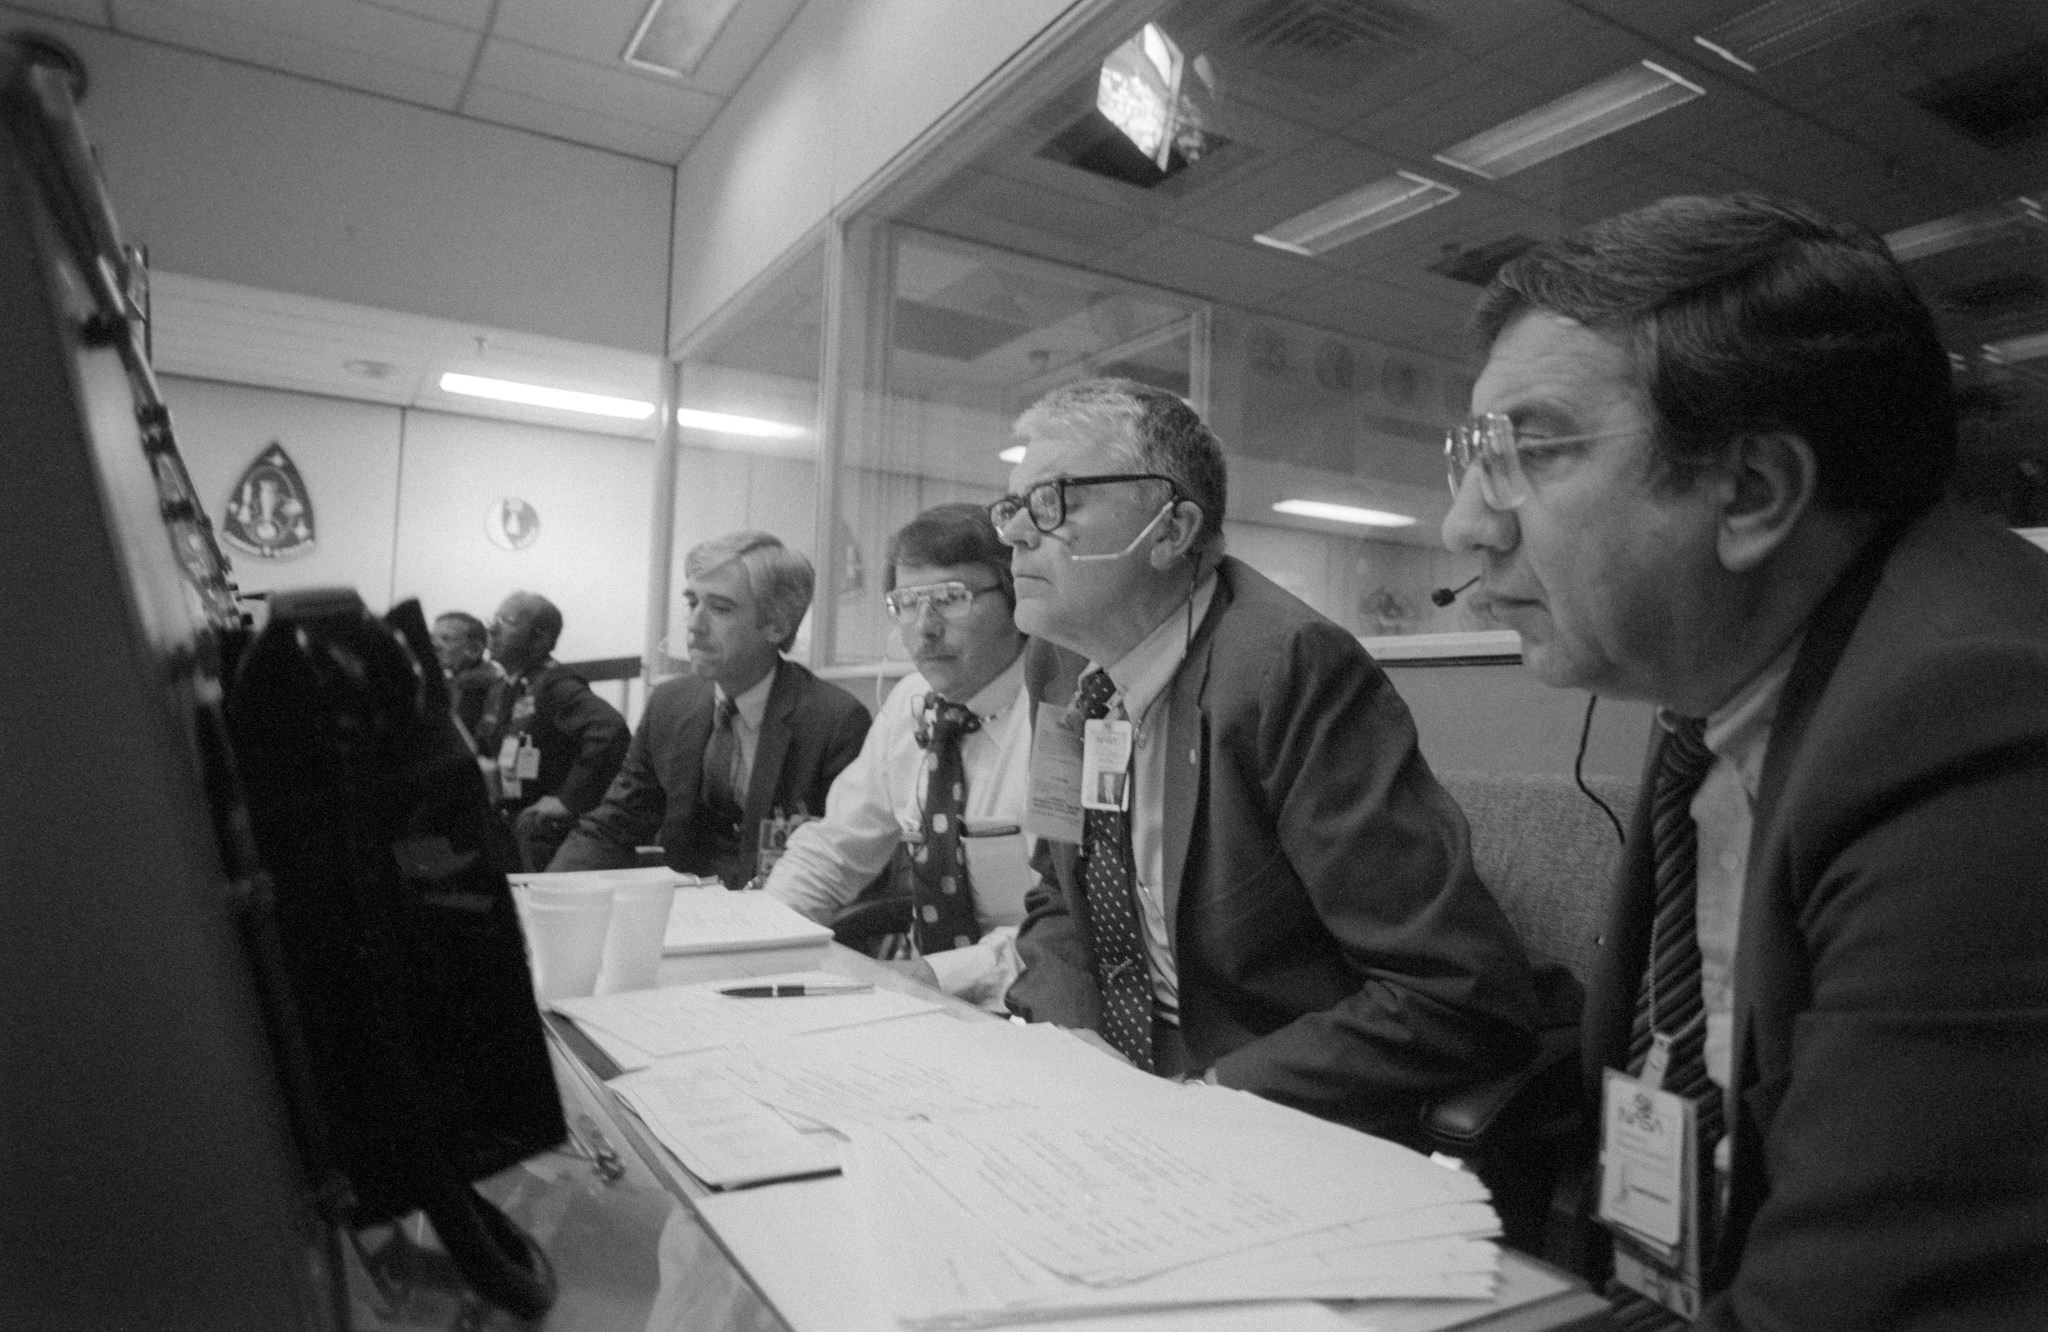 Sitting in front of a console in the Mission Operation Control Room during the STS-6 EVA are Milt Silveira, Special Assistant to the NASA Deputy Administrator, Hans Mark, who is sitting next to him.